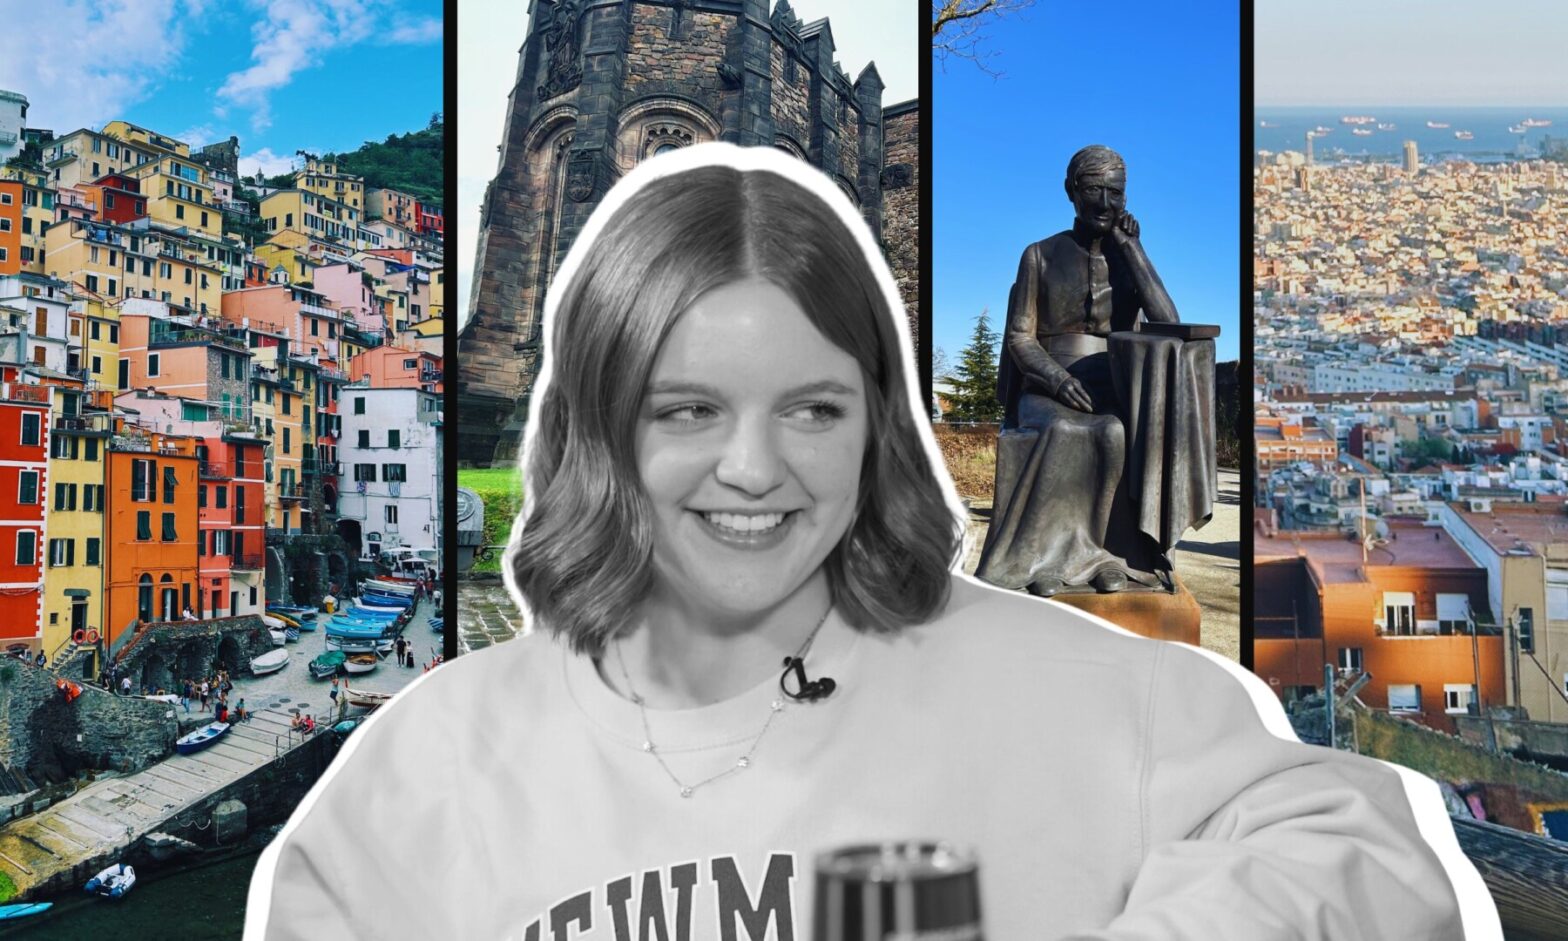 Emily Pachta - study abroad podcast episode of Newman University